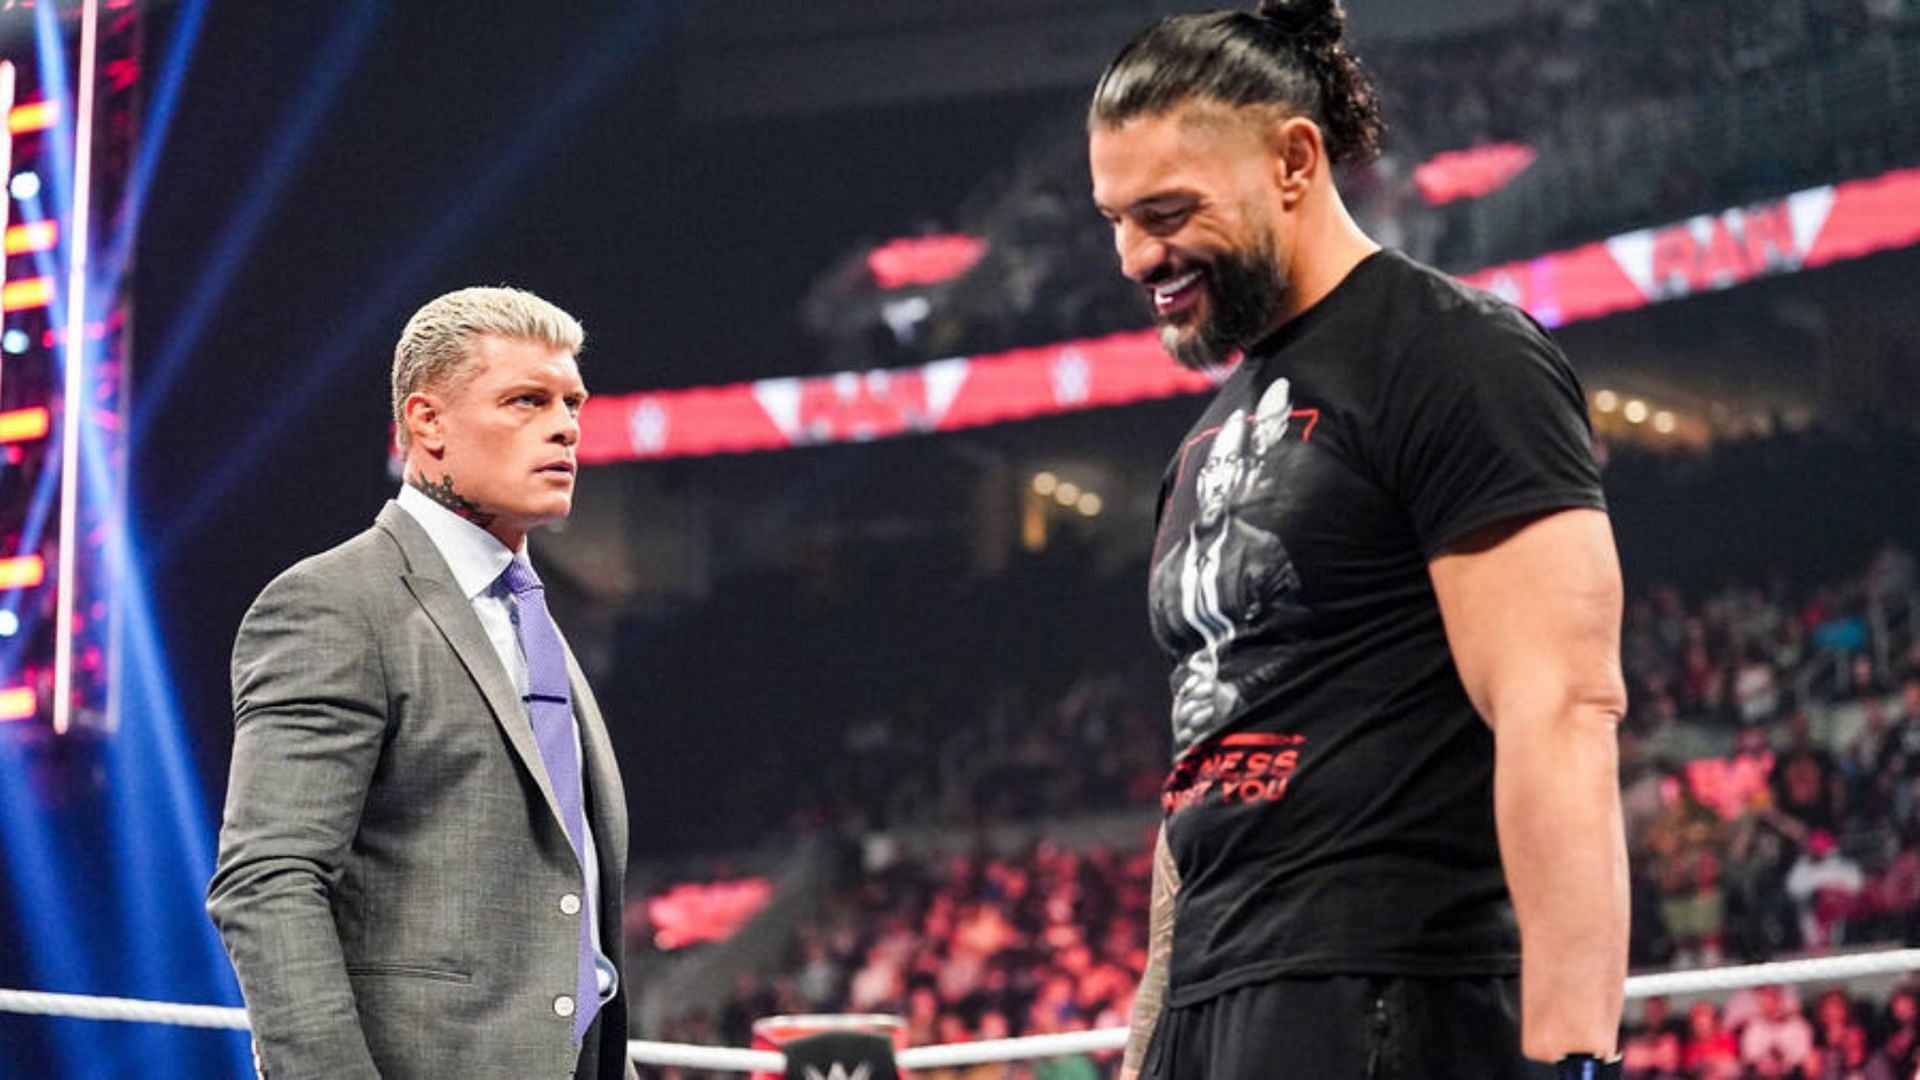 Cody Rhodes and Roman Reigns will have another confrontation on WWE SmackDown